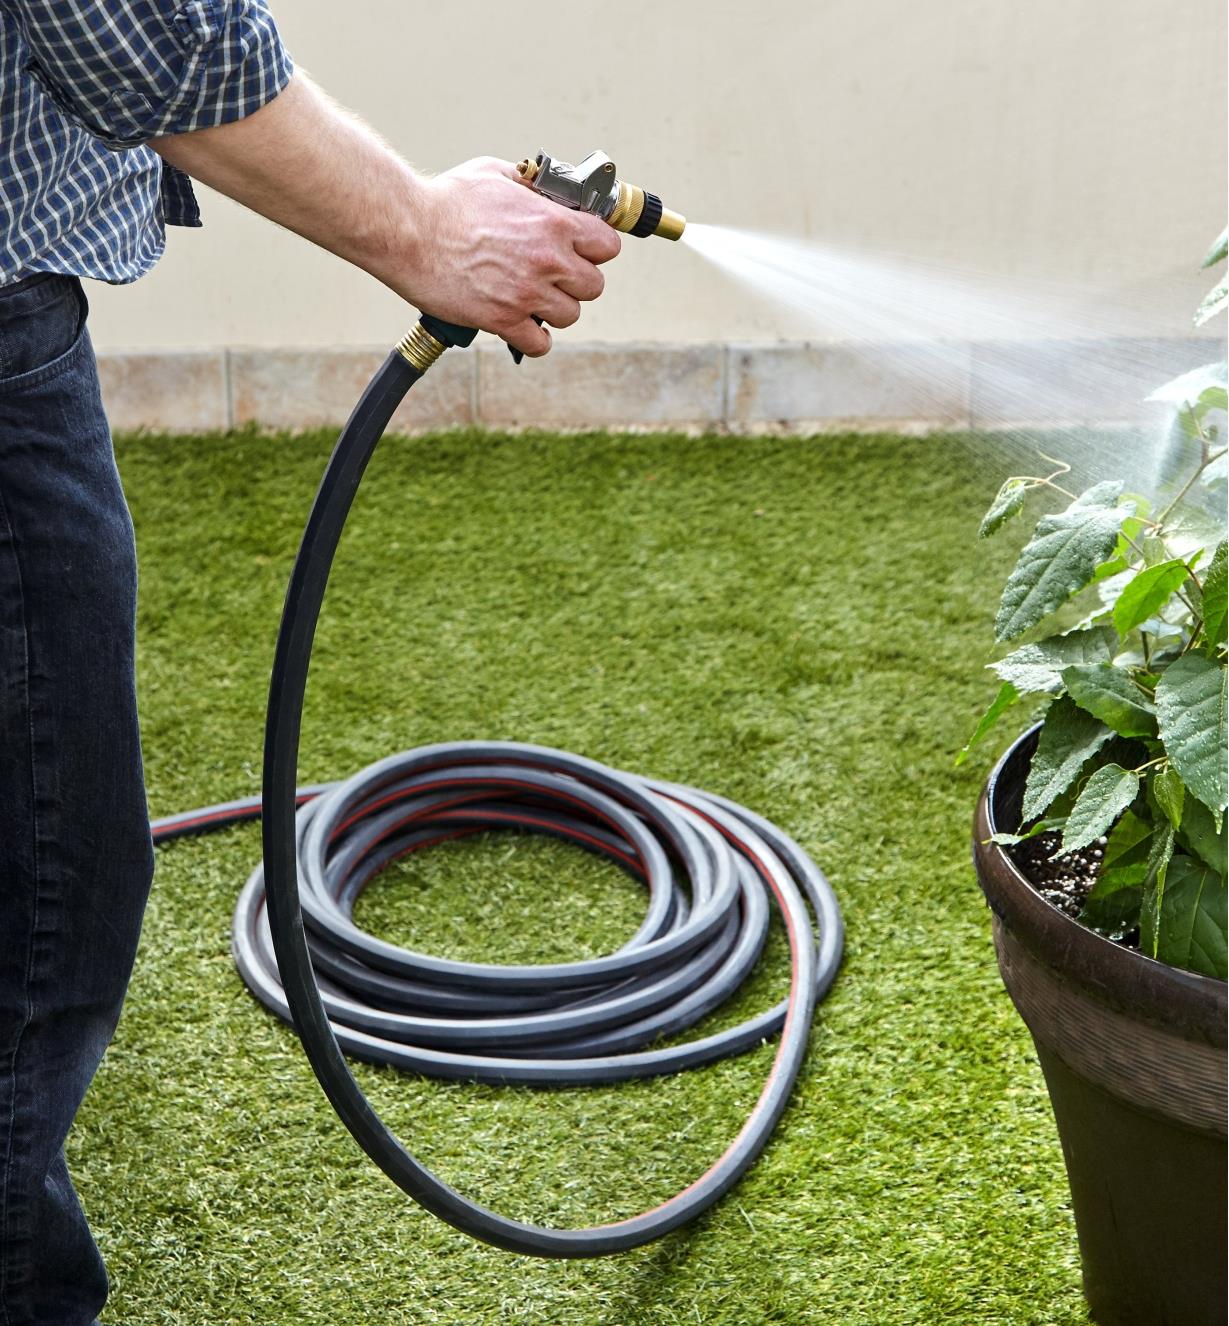 Using a Viper hose to water a planter